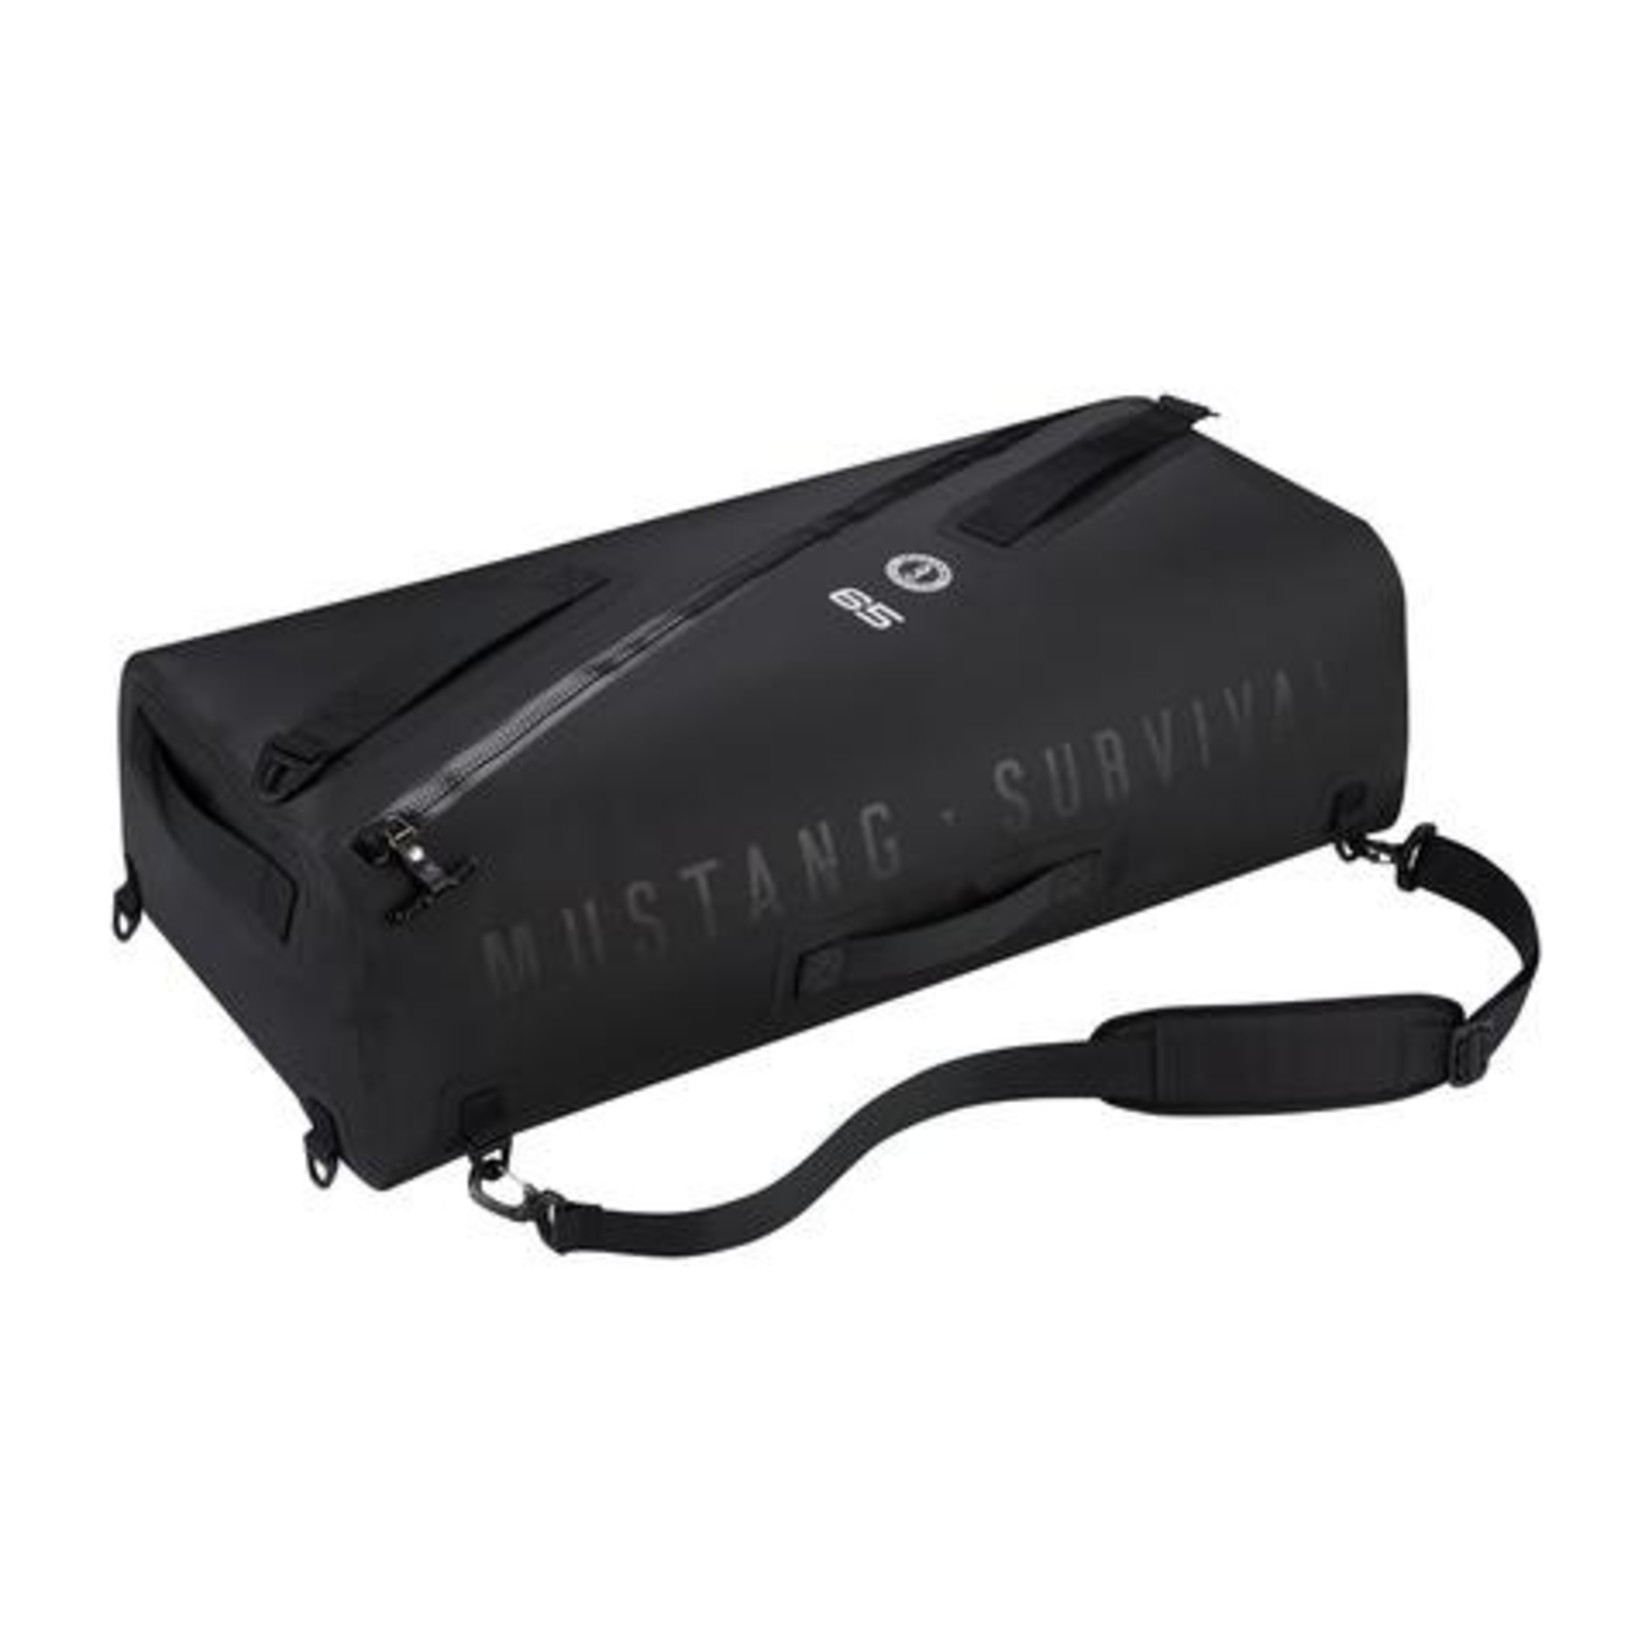 Mustang Survival Mustang Survival Greenwater Submersible Deck Dry Bag